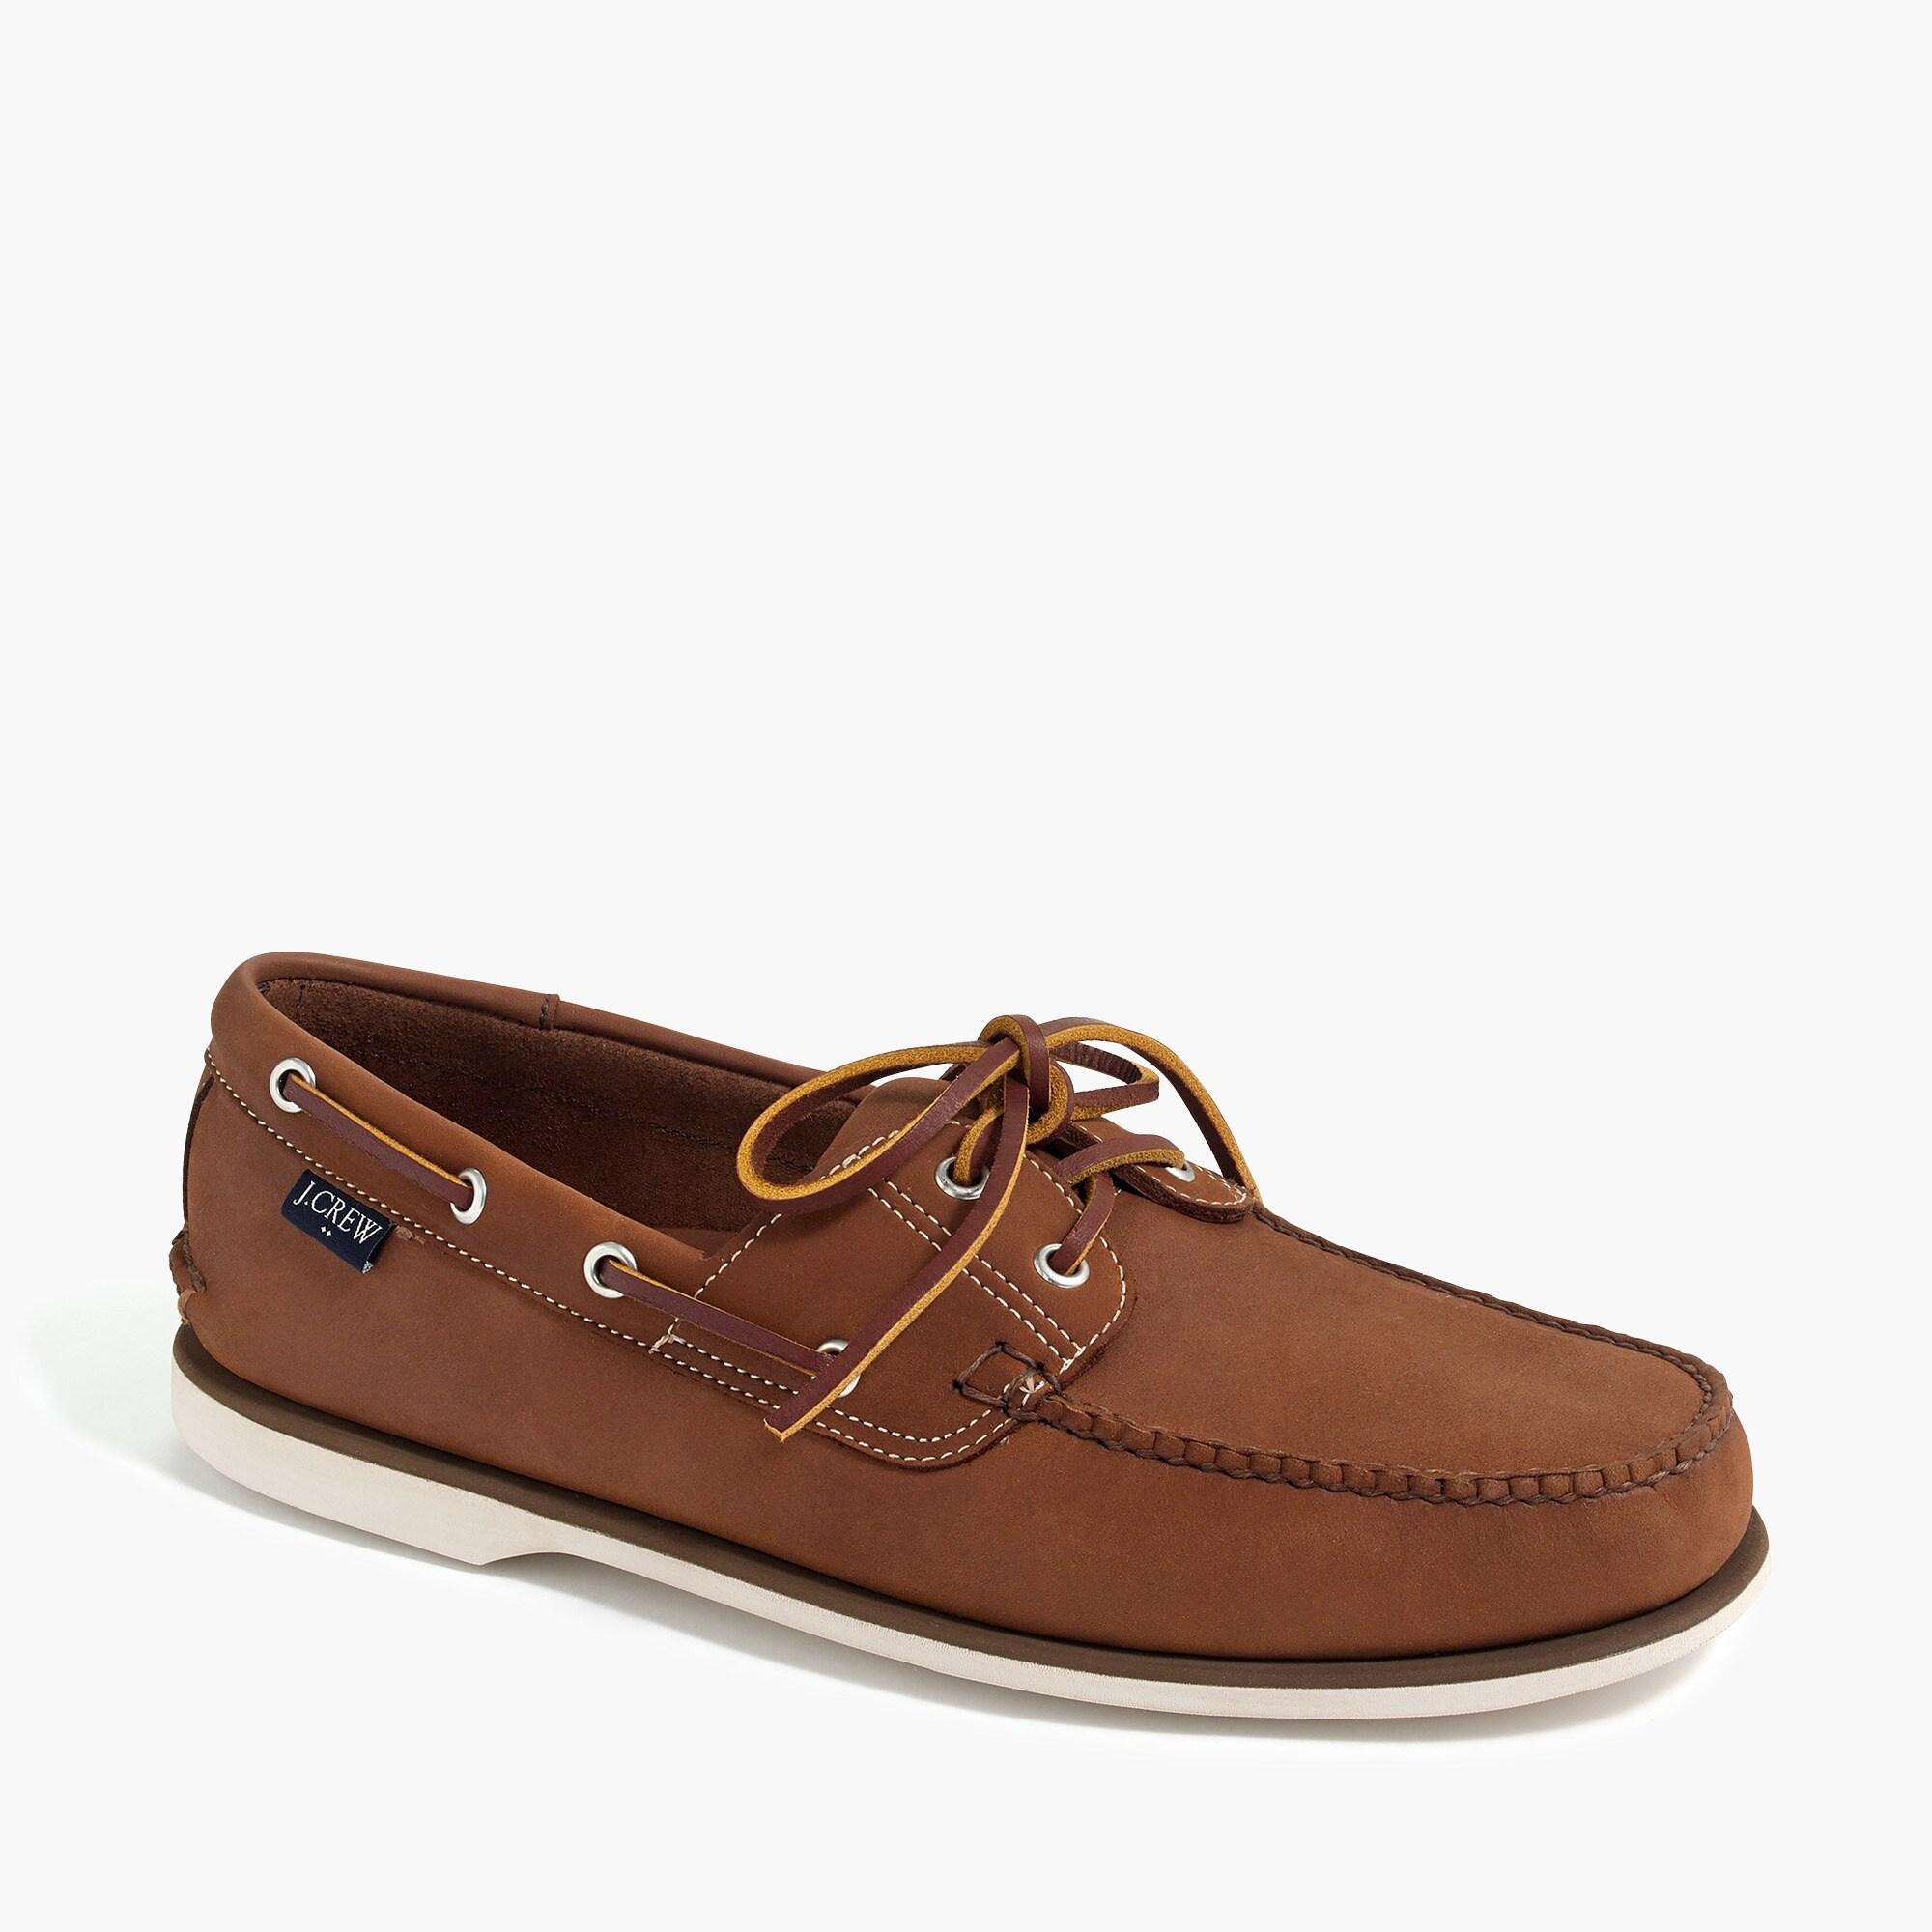 J.Crew Classic Leather Boat Shoes in Vintage Cognac (Brown) for Men - Lyst